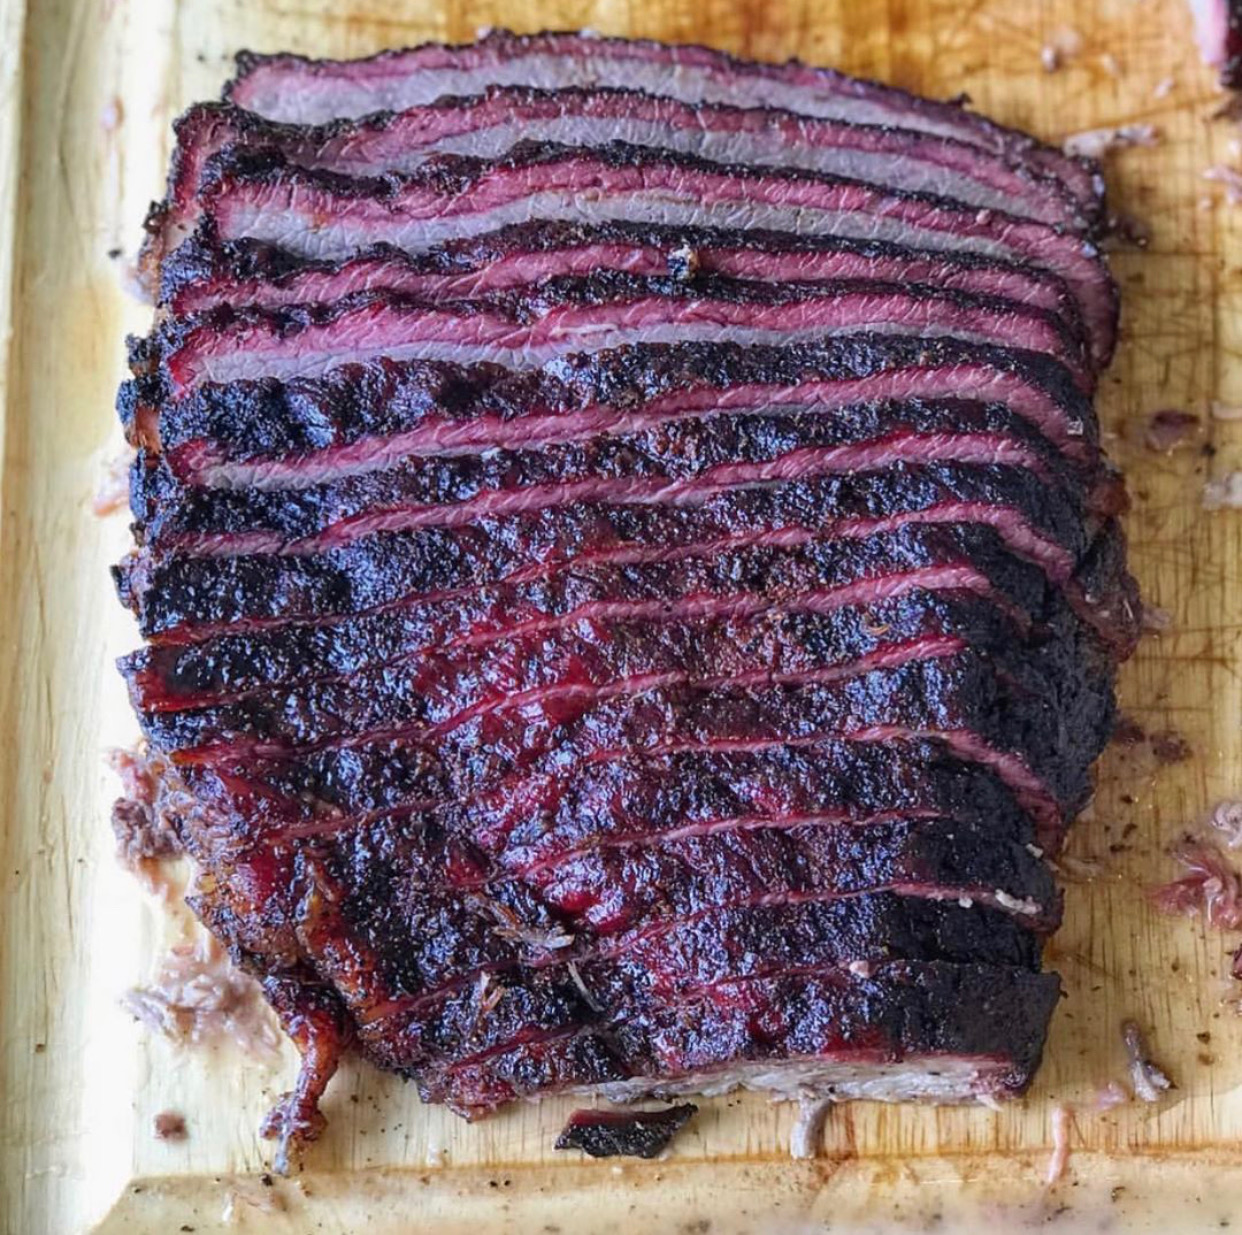 Smoked BBQ brisket slices are like manna from heaven!